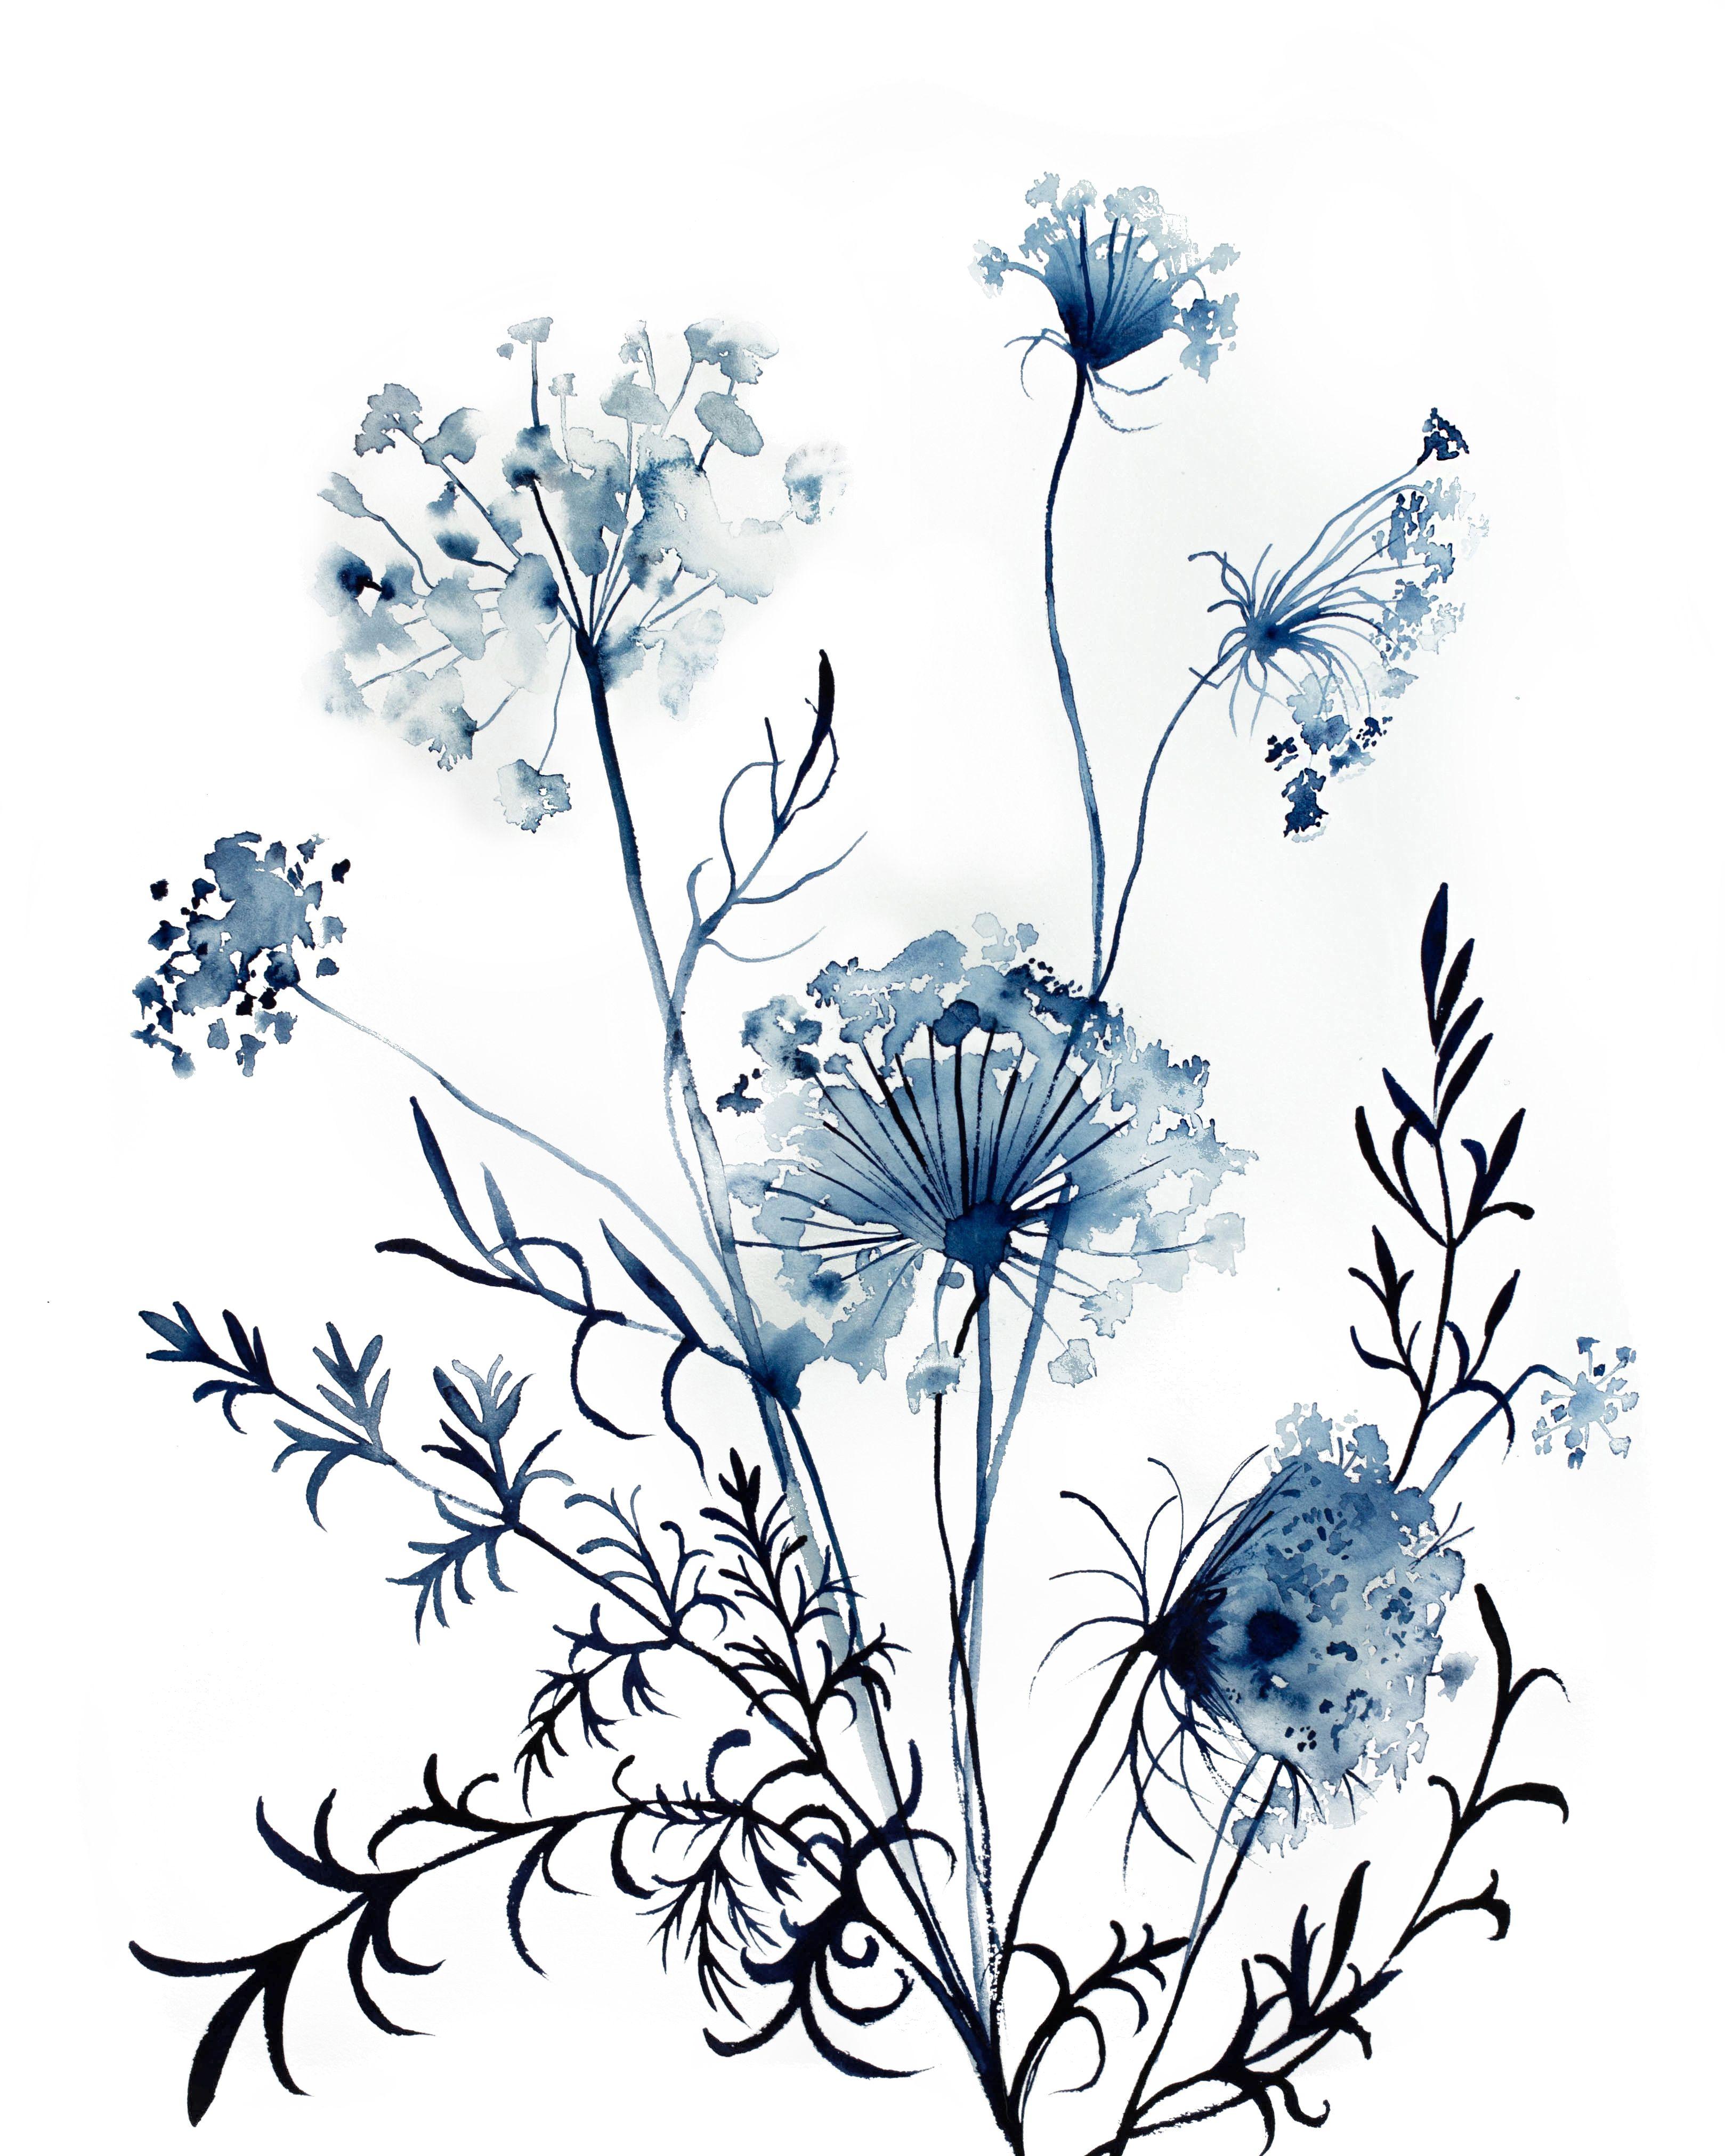 Queen Anne's Lace No. 10, Painting, Watercolor on Paper - Art by Elizabeth Becker